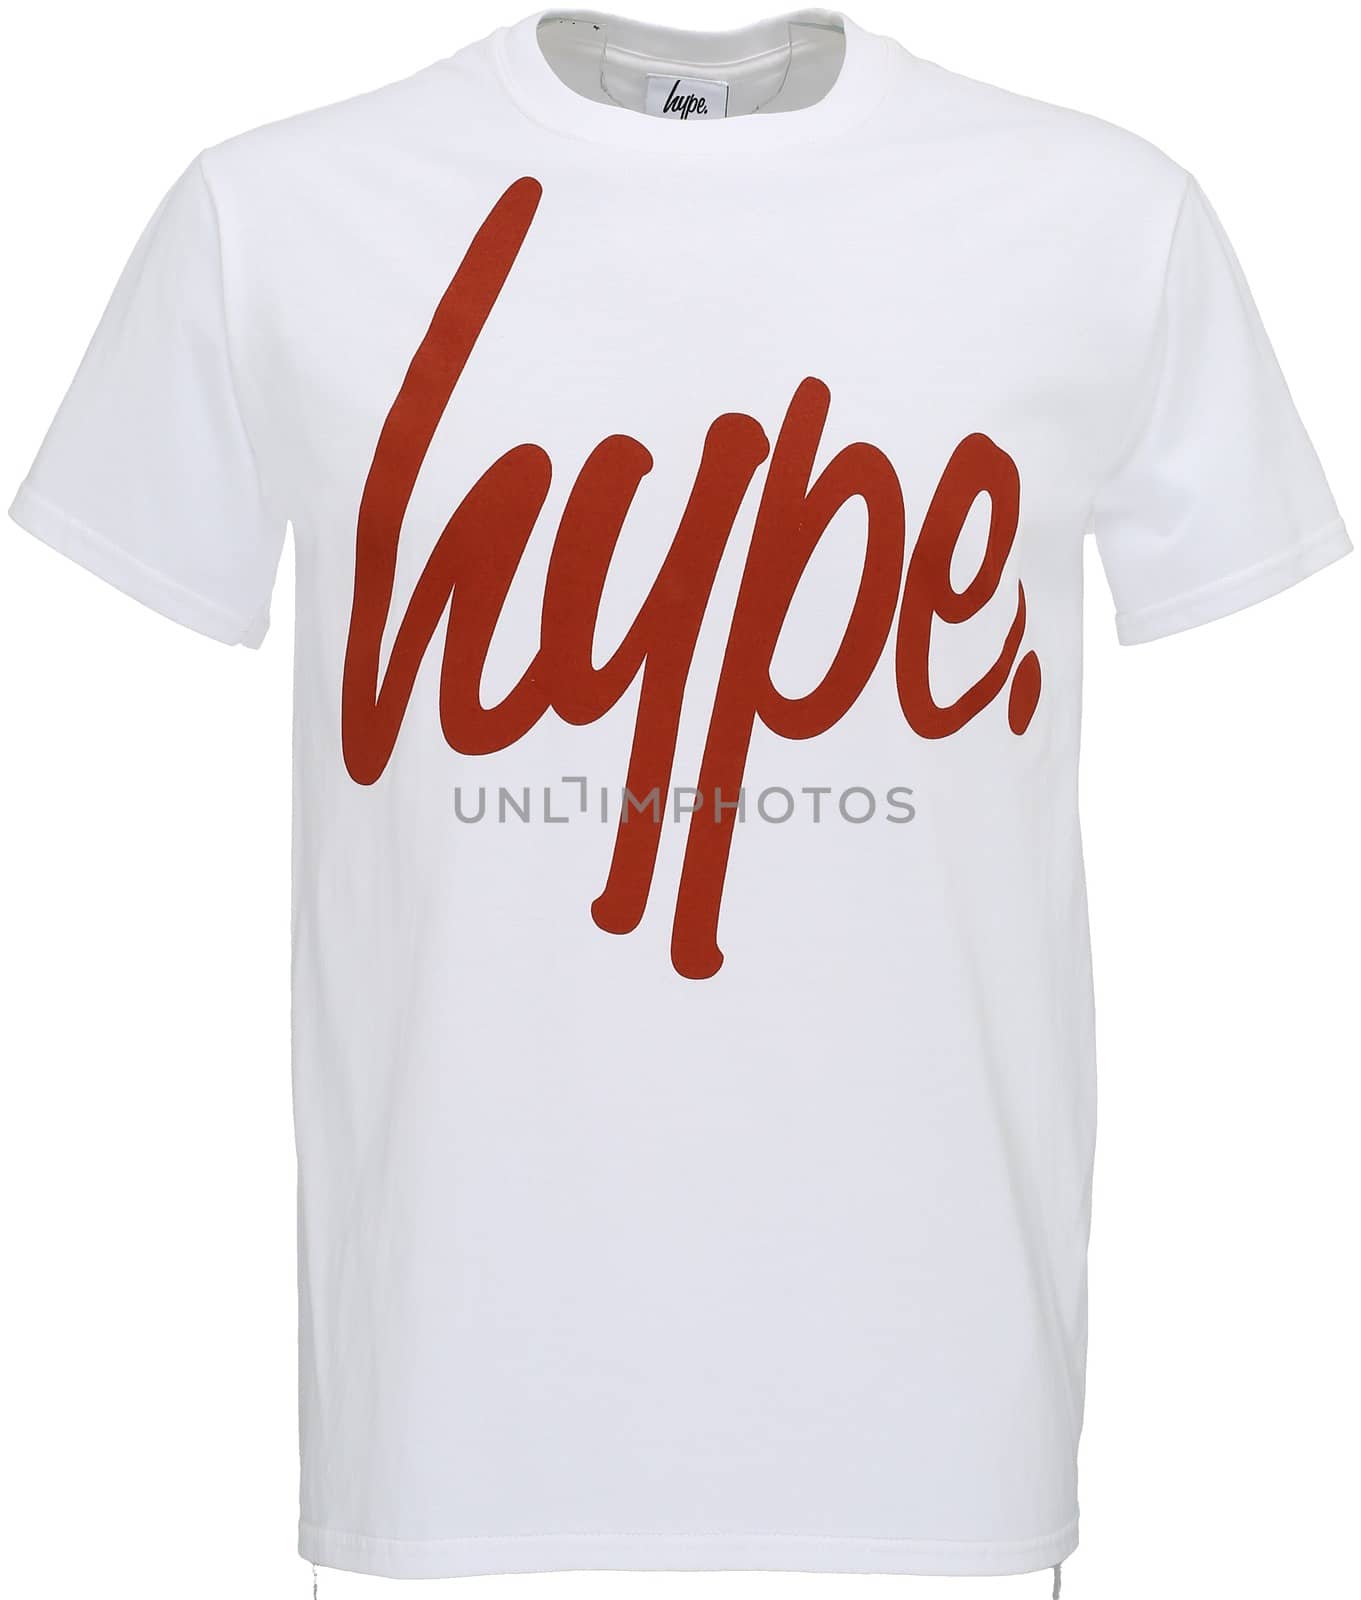 White Hype T-shirt by sonalideo